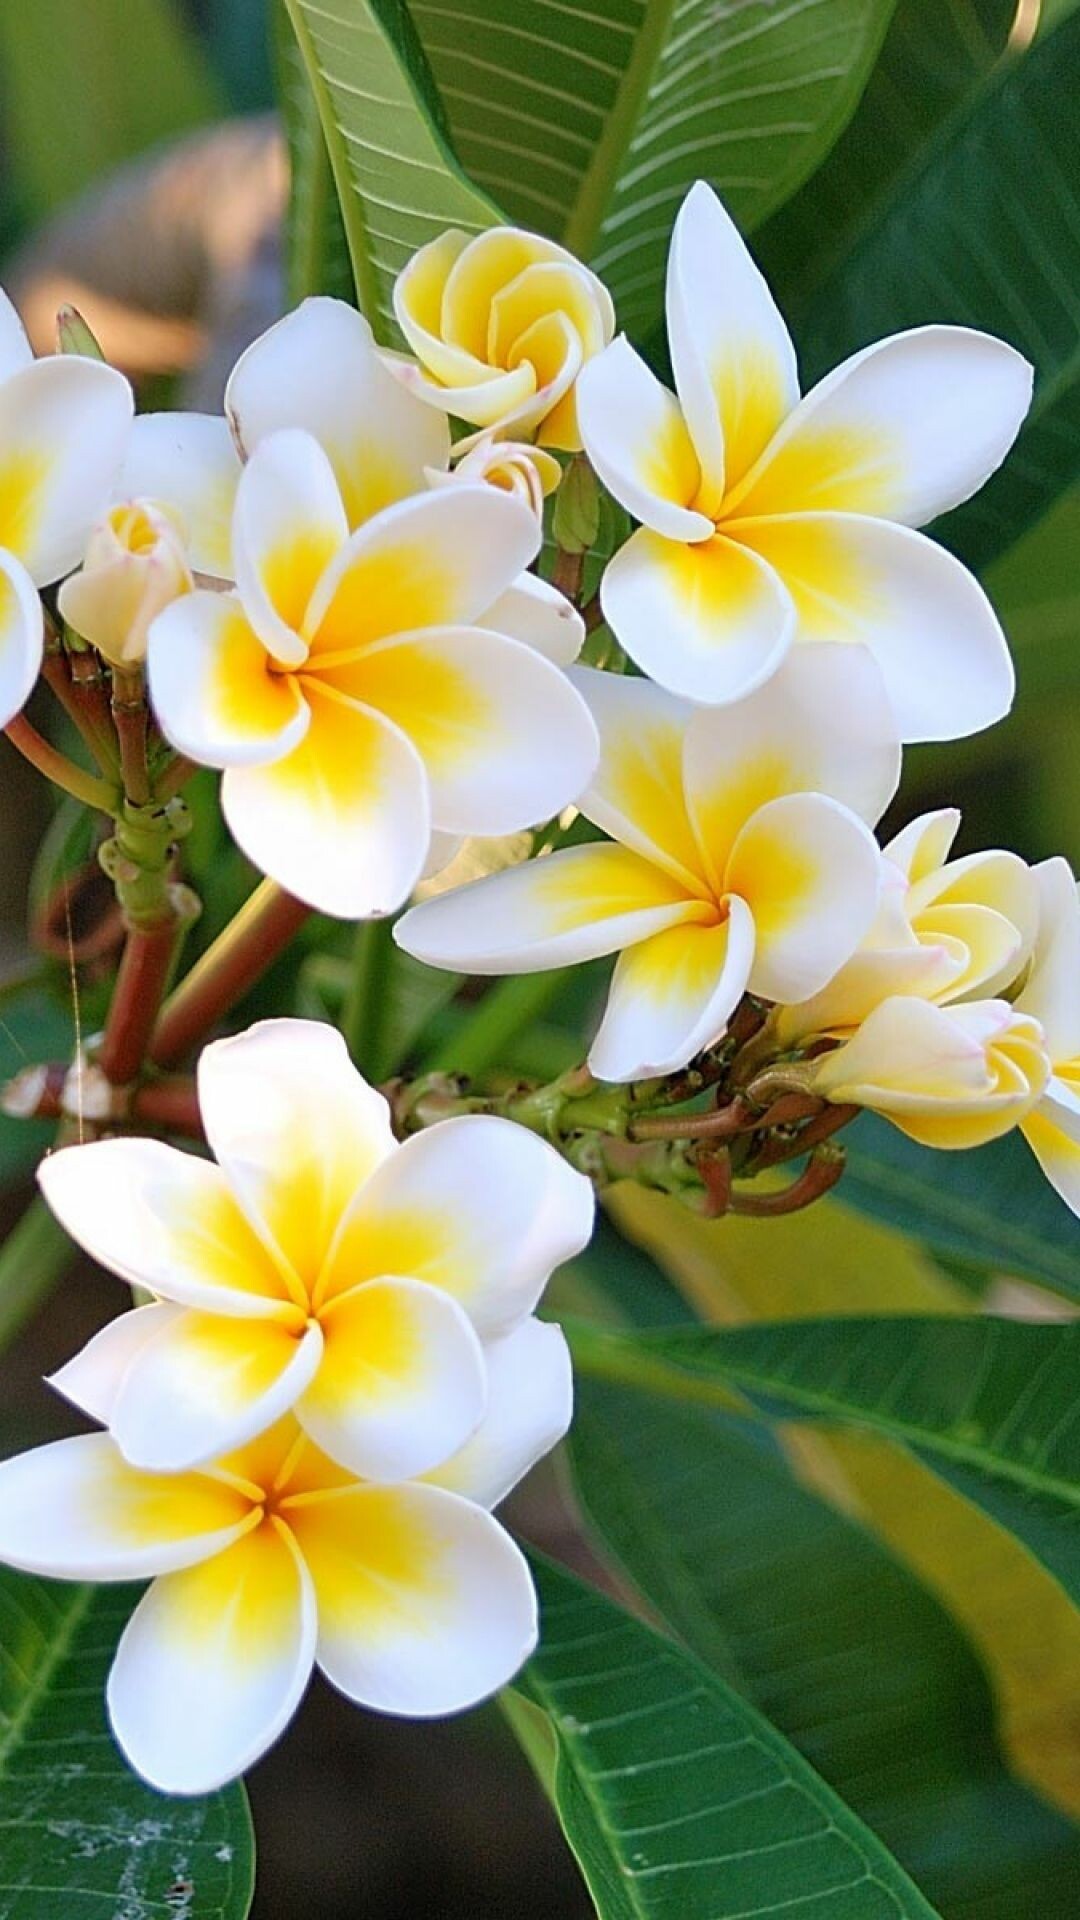 Green and white plumeria leaves, Sony Xperia wallpaper, Beautiful orchid flower, Captivating beauty, 1080x1920 Full HD Phone